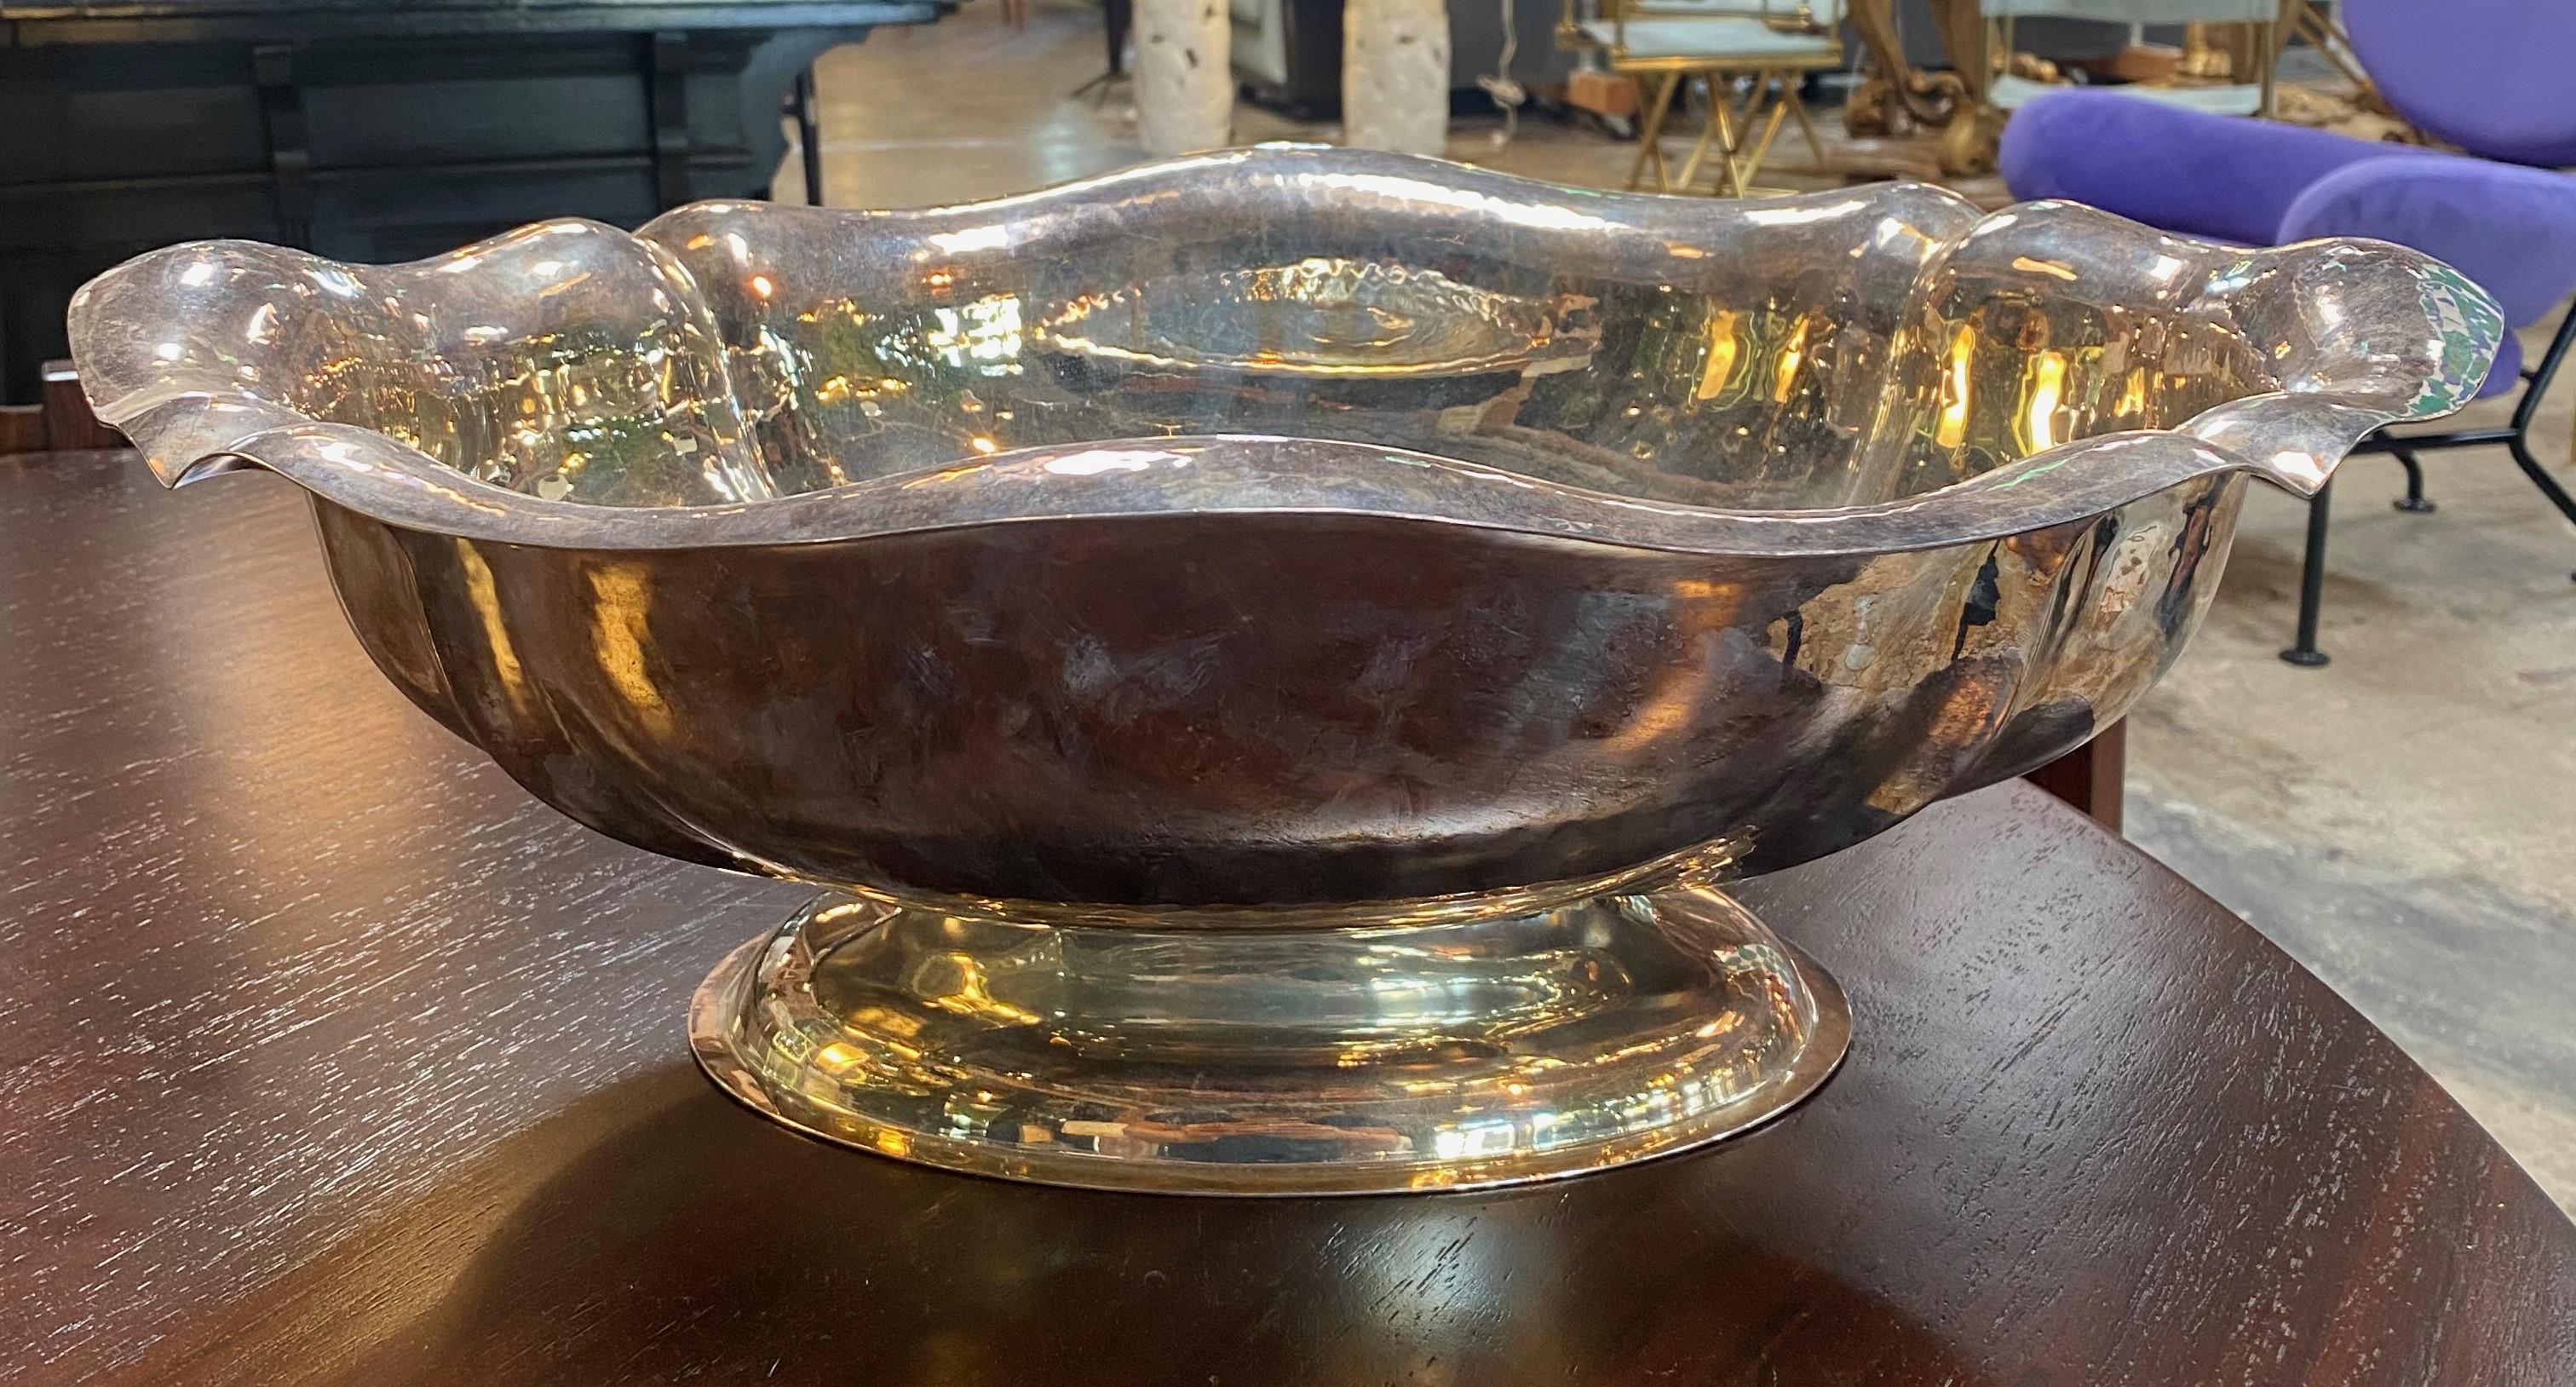 Large Italian sterling silver centerpiece bowl, 1950s.
Large traditional sterling silver centerpiece bowl. Curved sides and stepped foot. The Italian traditional bowl of early 1950s.